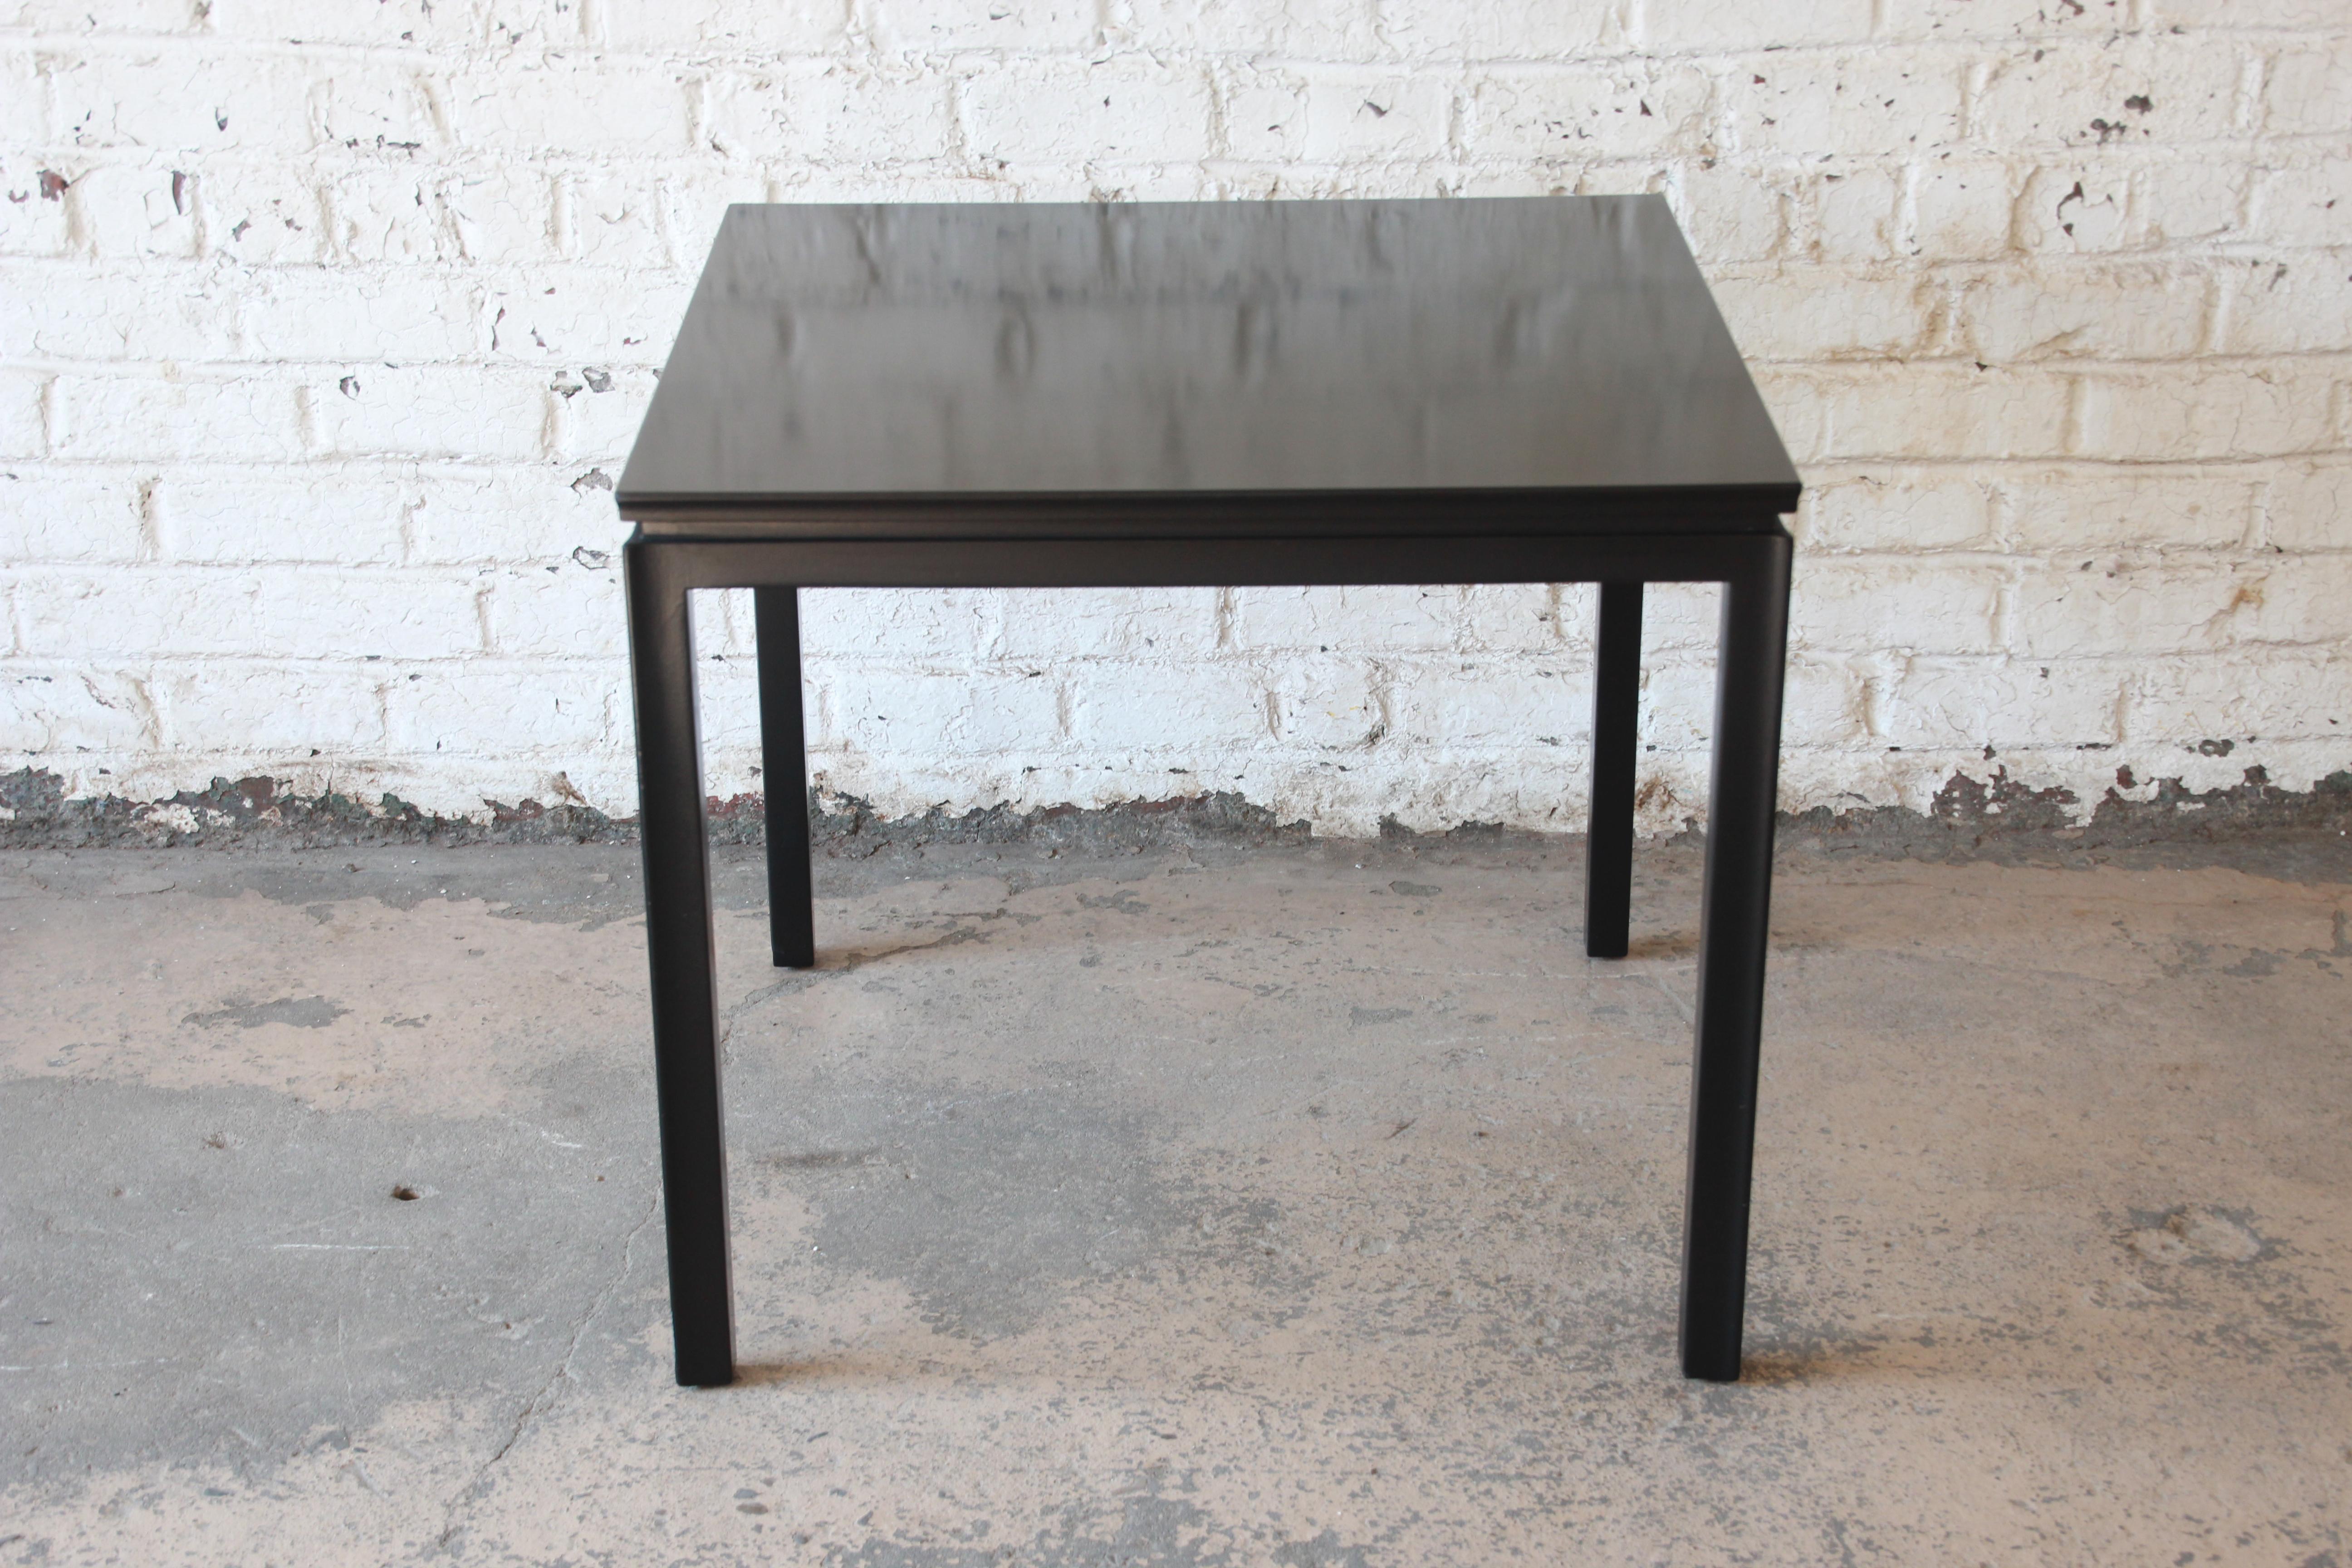 An exceptional Mid-Century Modern game table designed by Edward Wormley for Dunbar. The table features a simple and elegant design and a newly black lacquered finish over mahogany construction. Perfect in a breakfast nook, eat-in kitchen or smaller